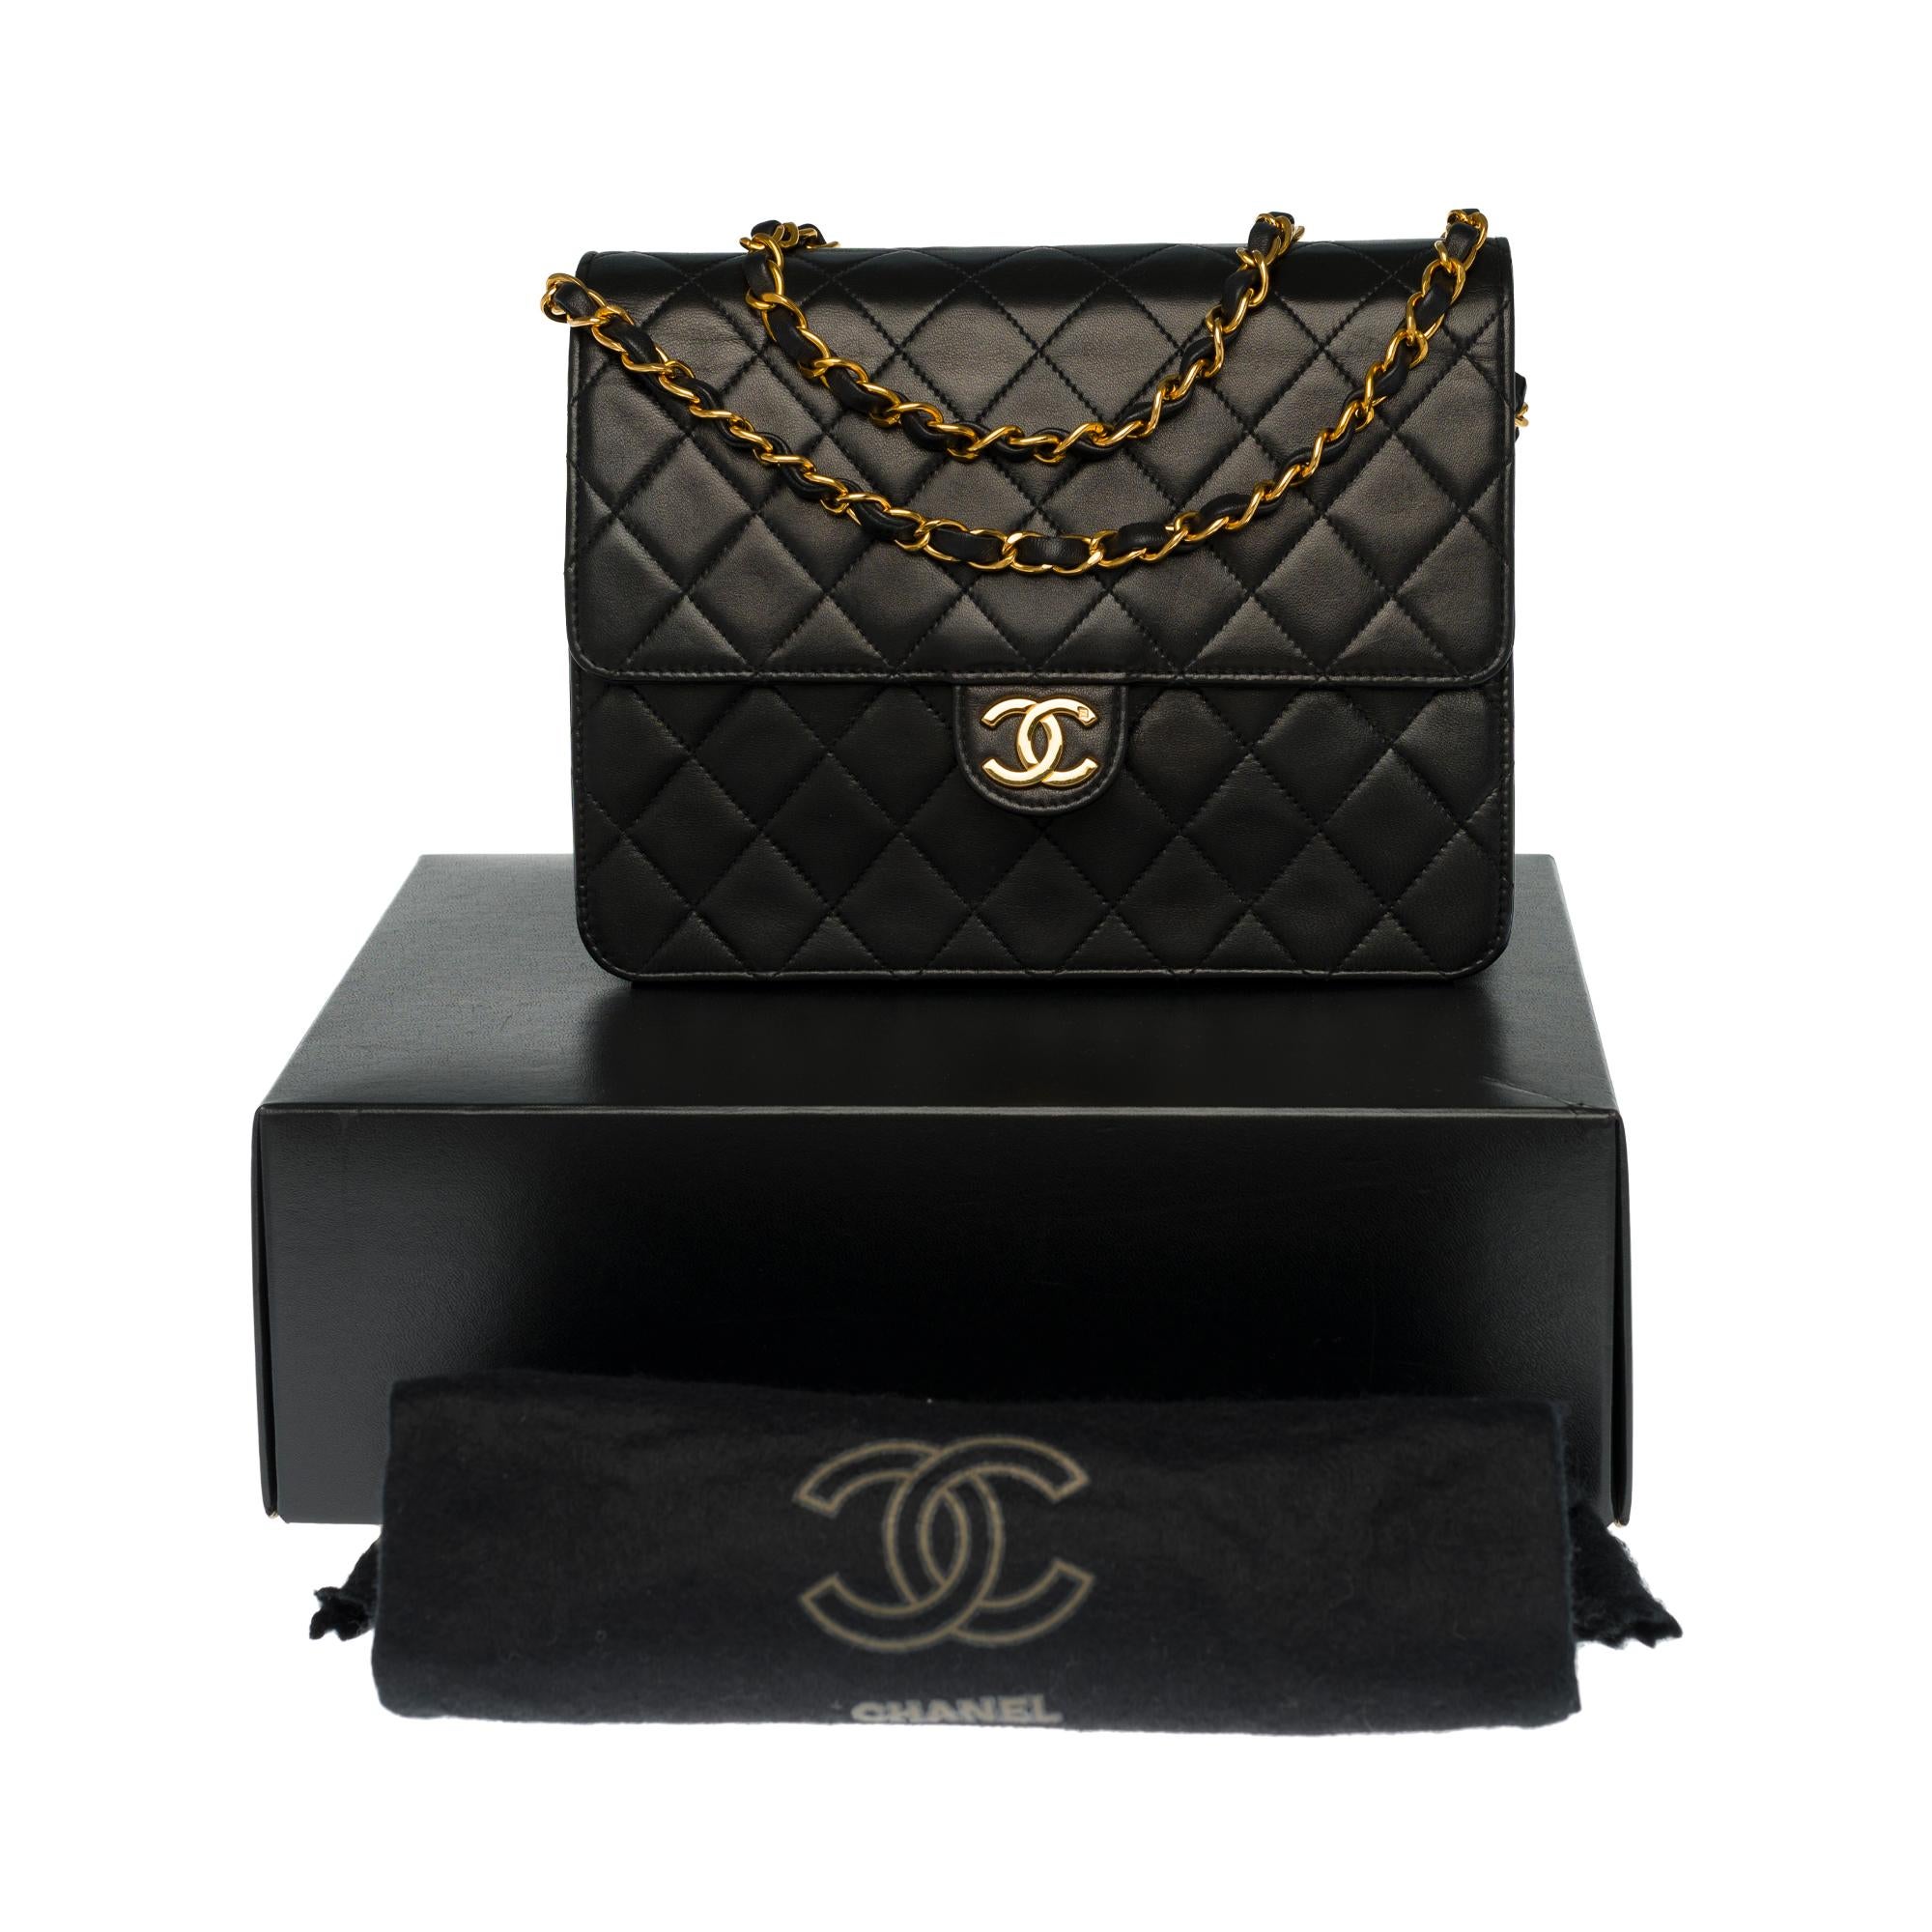 Rare Chanel Classic 22cm shoulder bag in black quilted lambskin with GHW 4